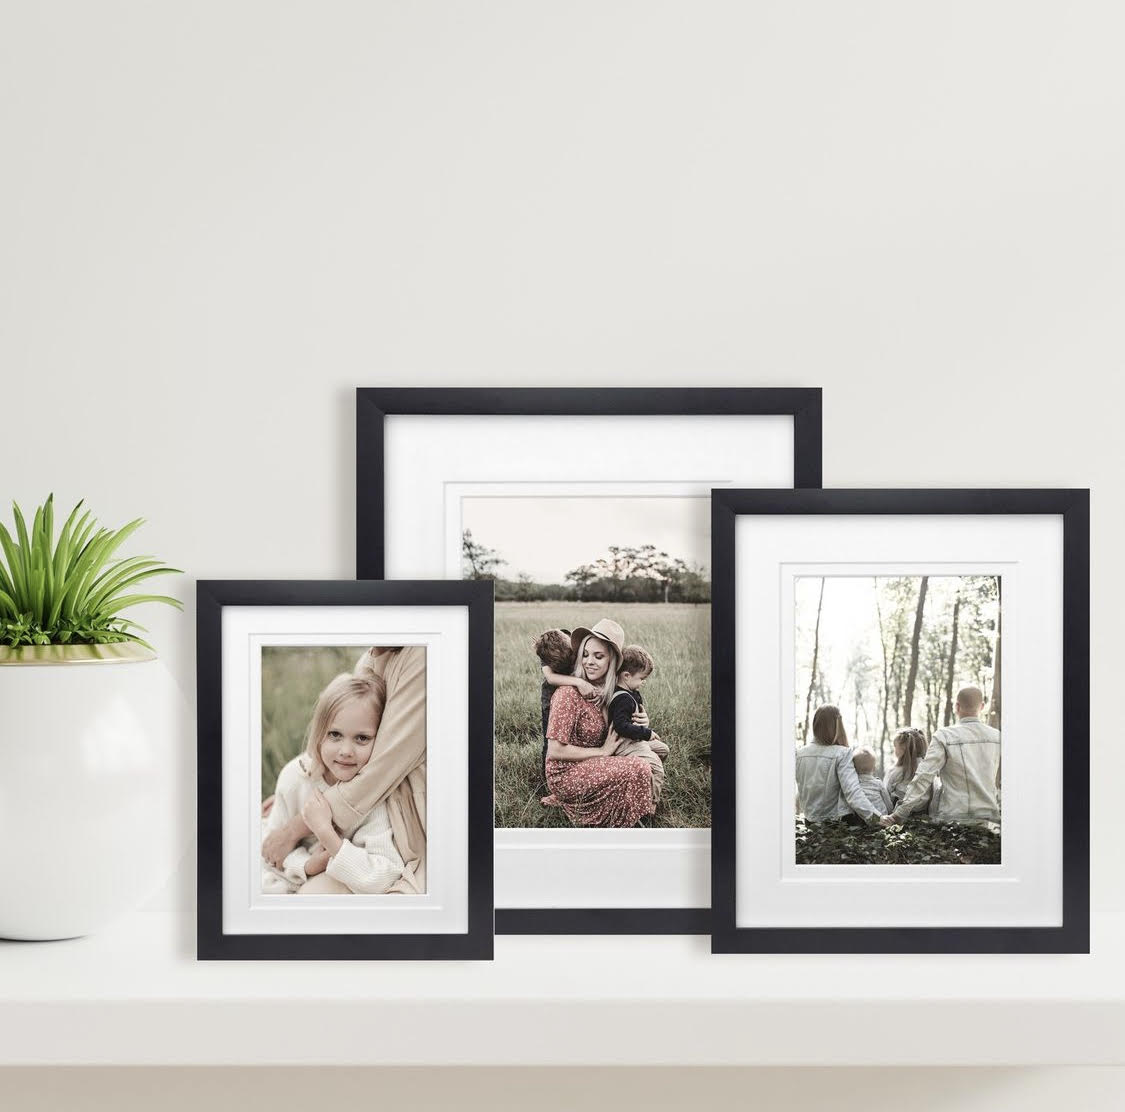 8x10” black timber frame with matboard to suit 5x7” photo